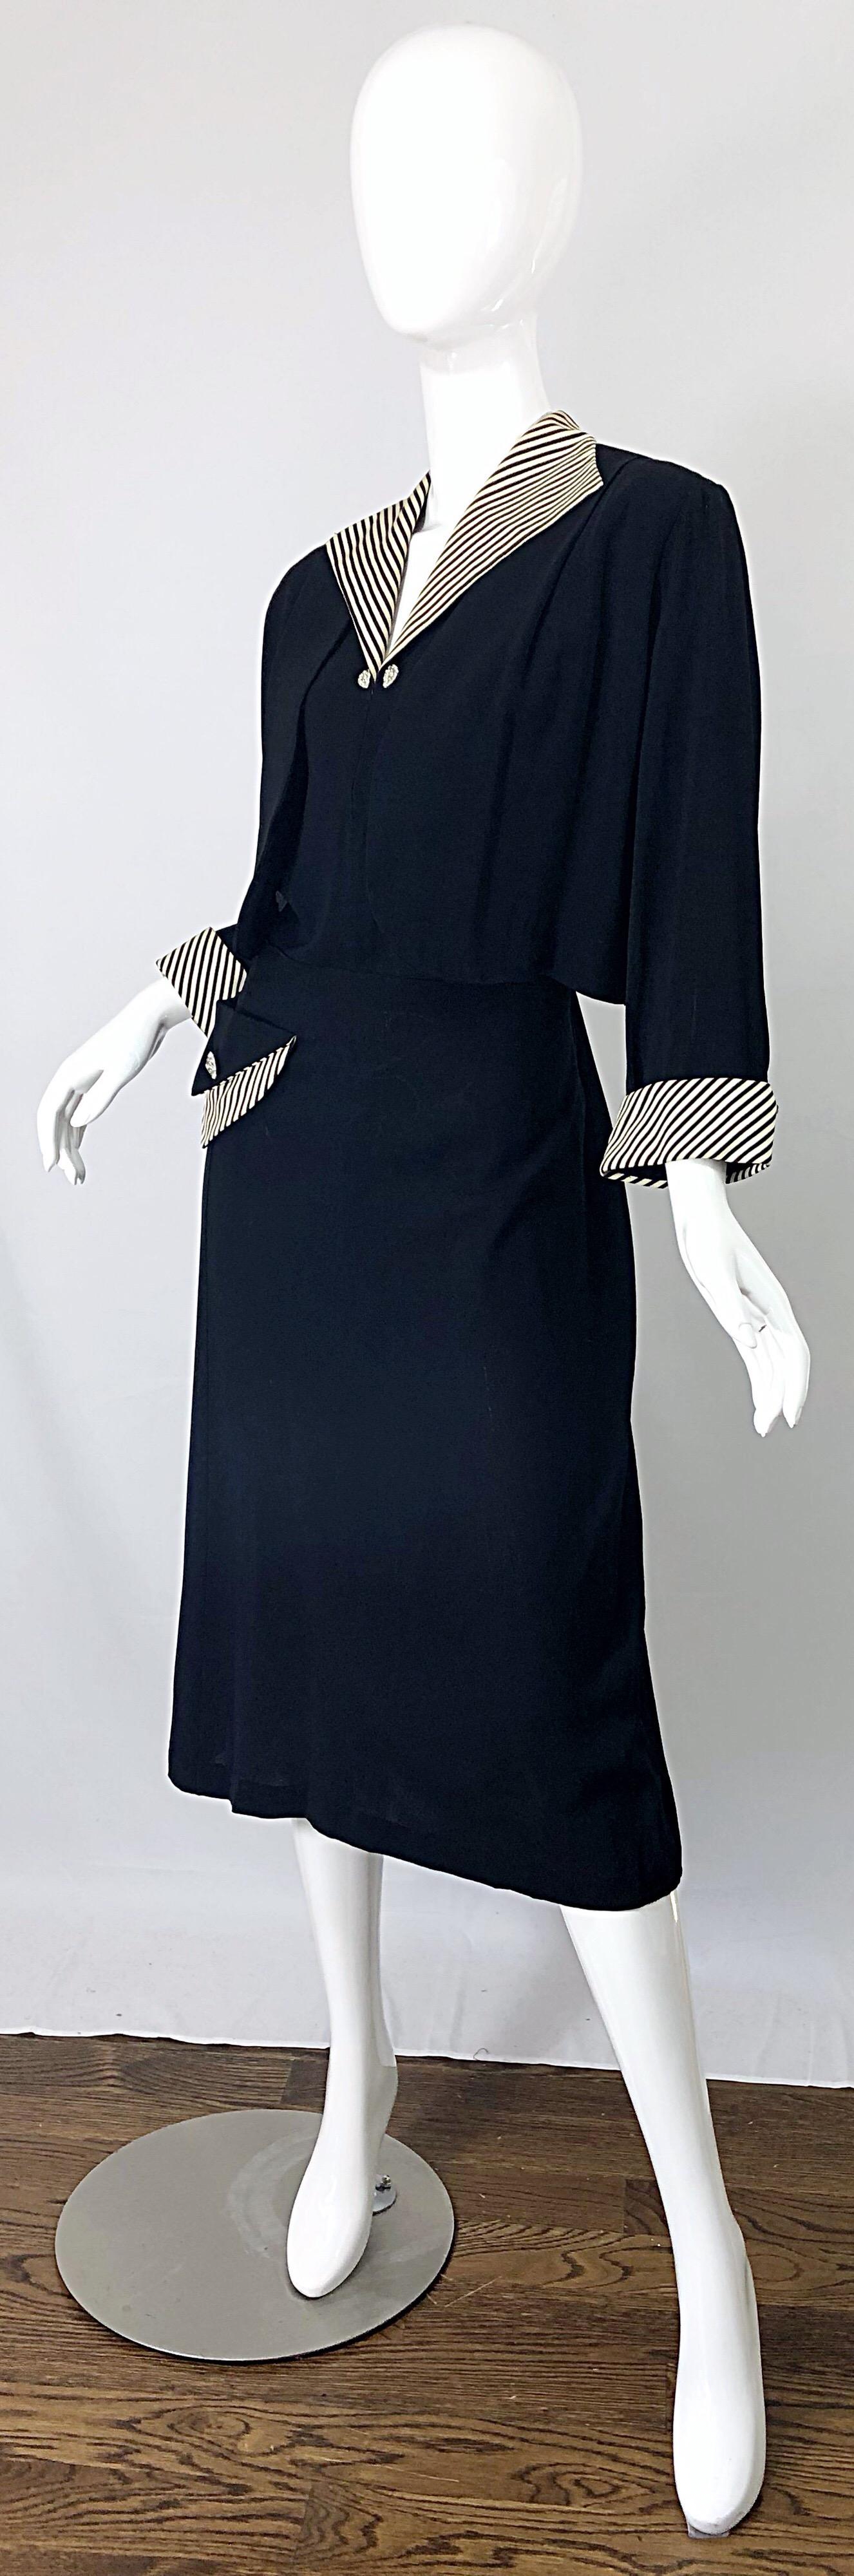 1940s Plus Size 20 / 22 Black and White Crepe Rhinestone 40s Dress and Jacket For Sale 2